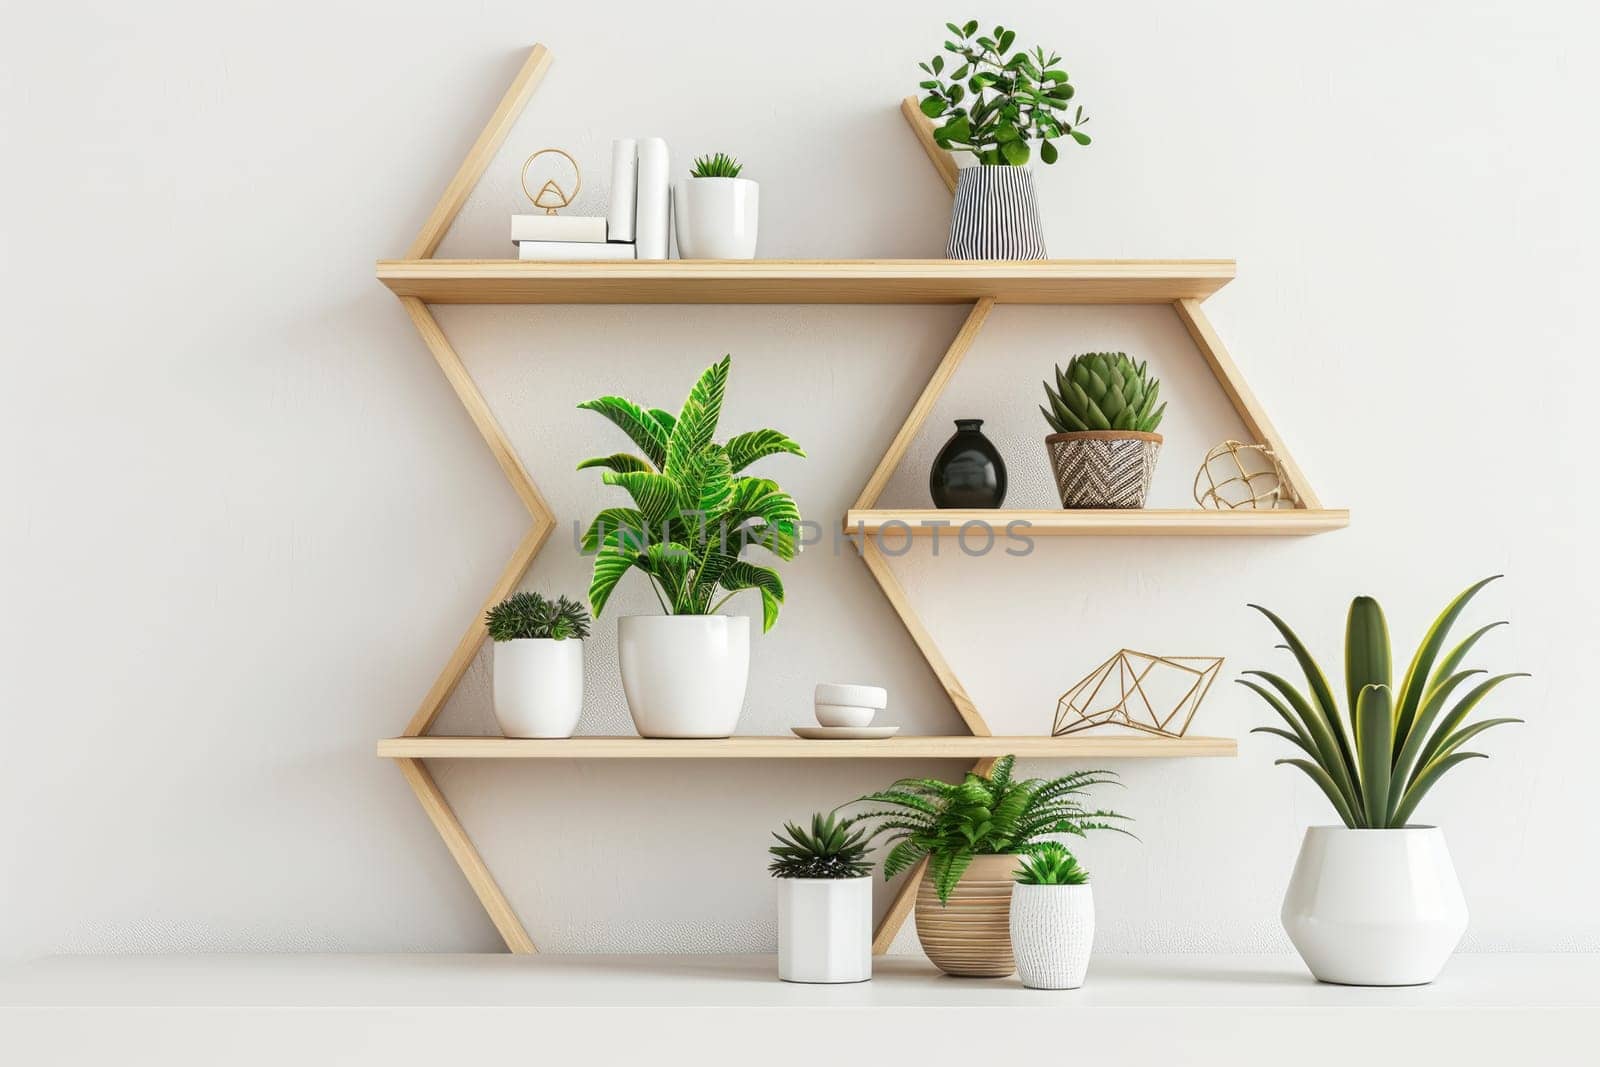 Minimalist workspace with a geometric bookshelf and potted plants. by Chawagen